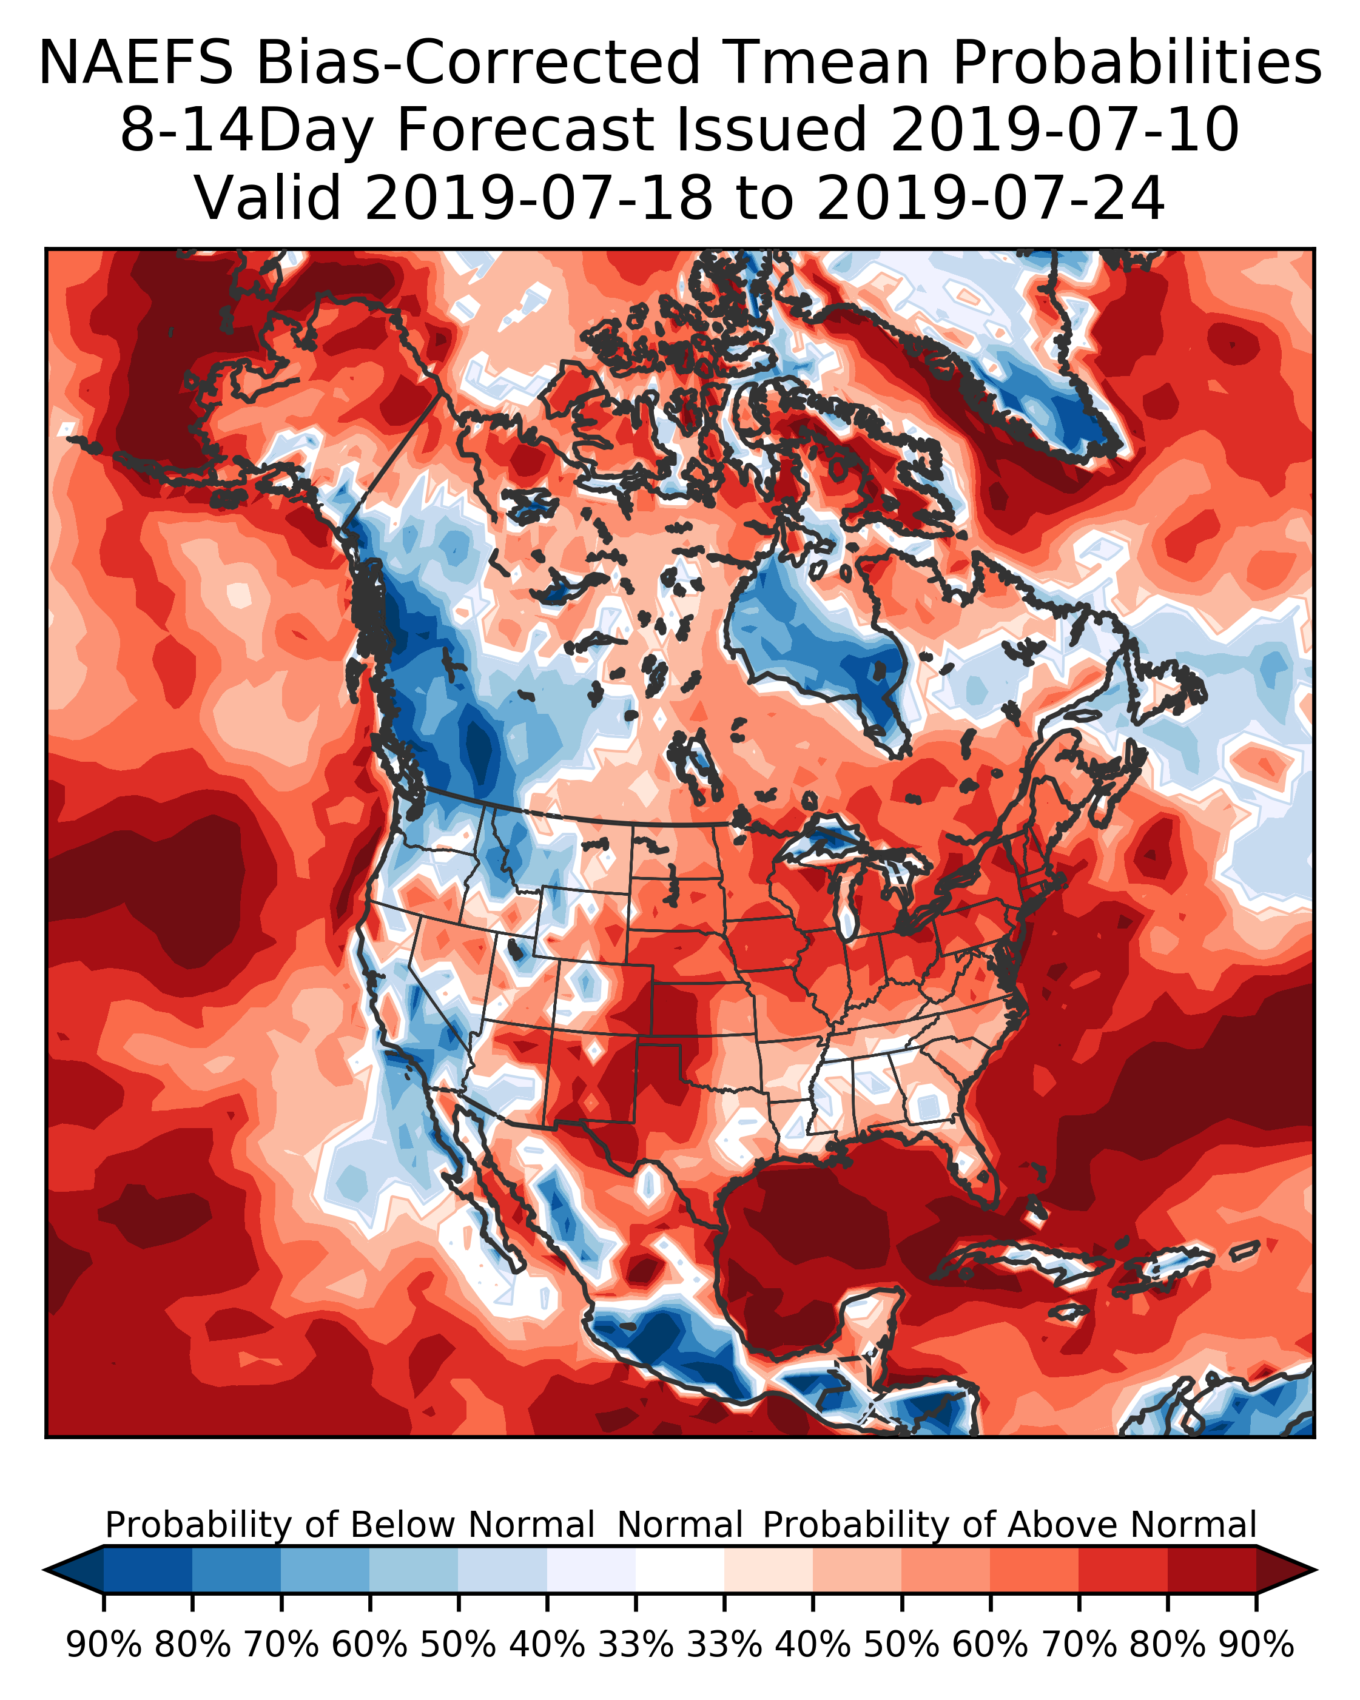 Warmer than average conditions are likely for much of the rest of July. (Courtesy NOAA)